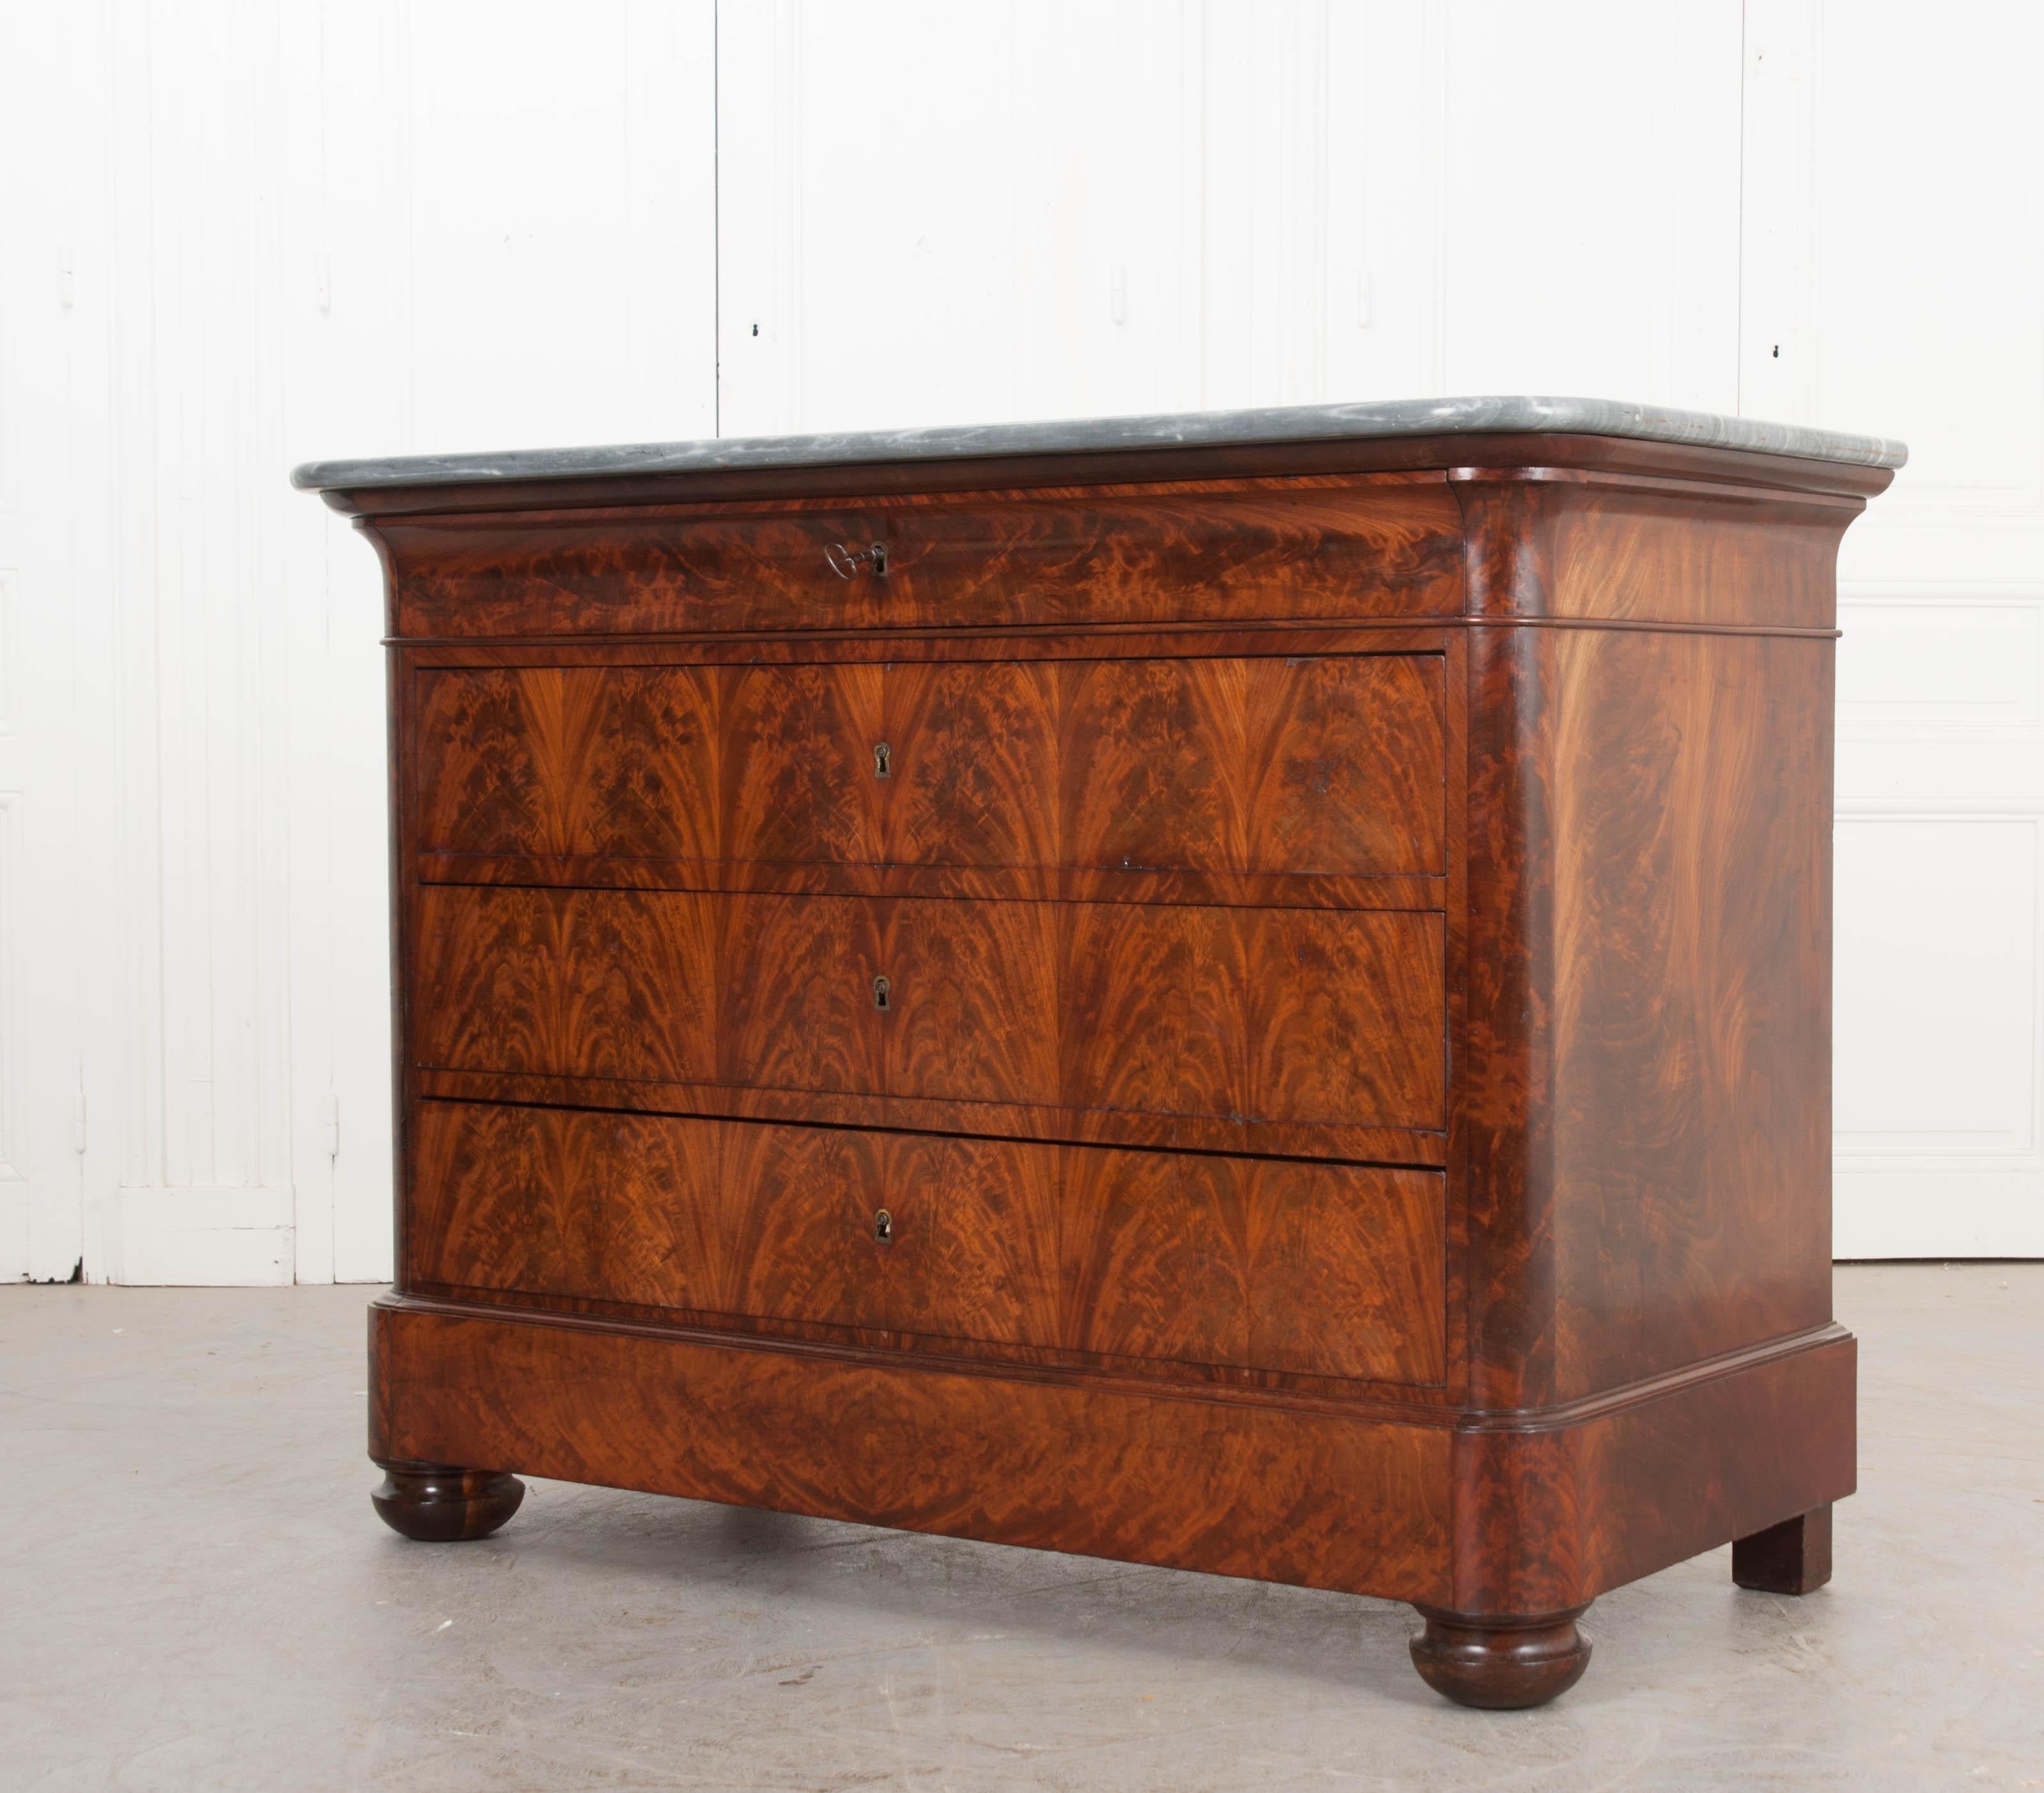 This elegant and restrained Louis Philippe flame mahogany four-drawer commode, circa 1830s is from France and has a gorgeous grey marble top and book-matched veneer. The finish is warm and rich with a professional French polish. This elegant piece